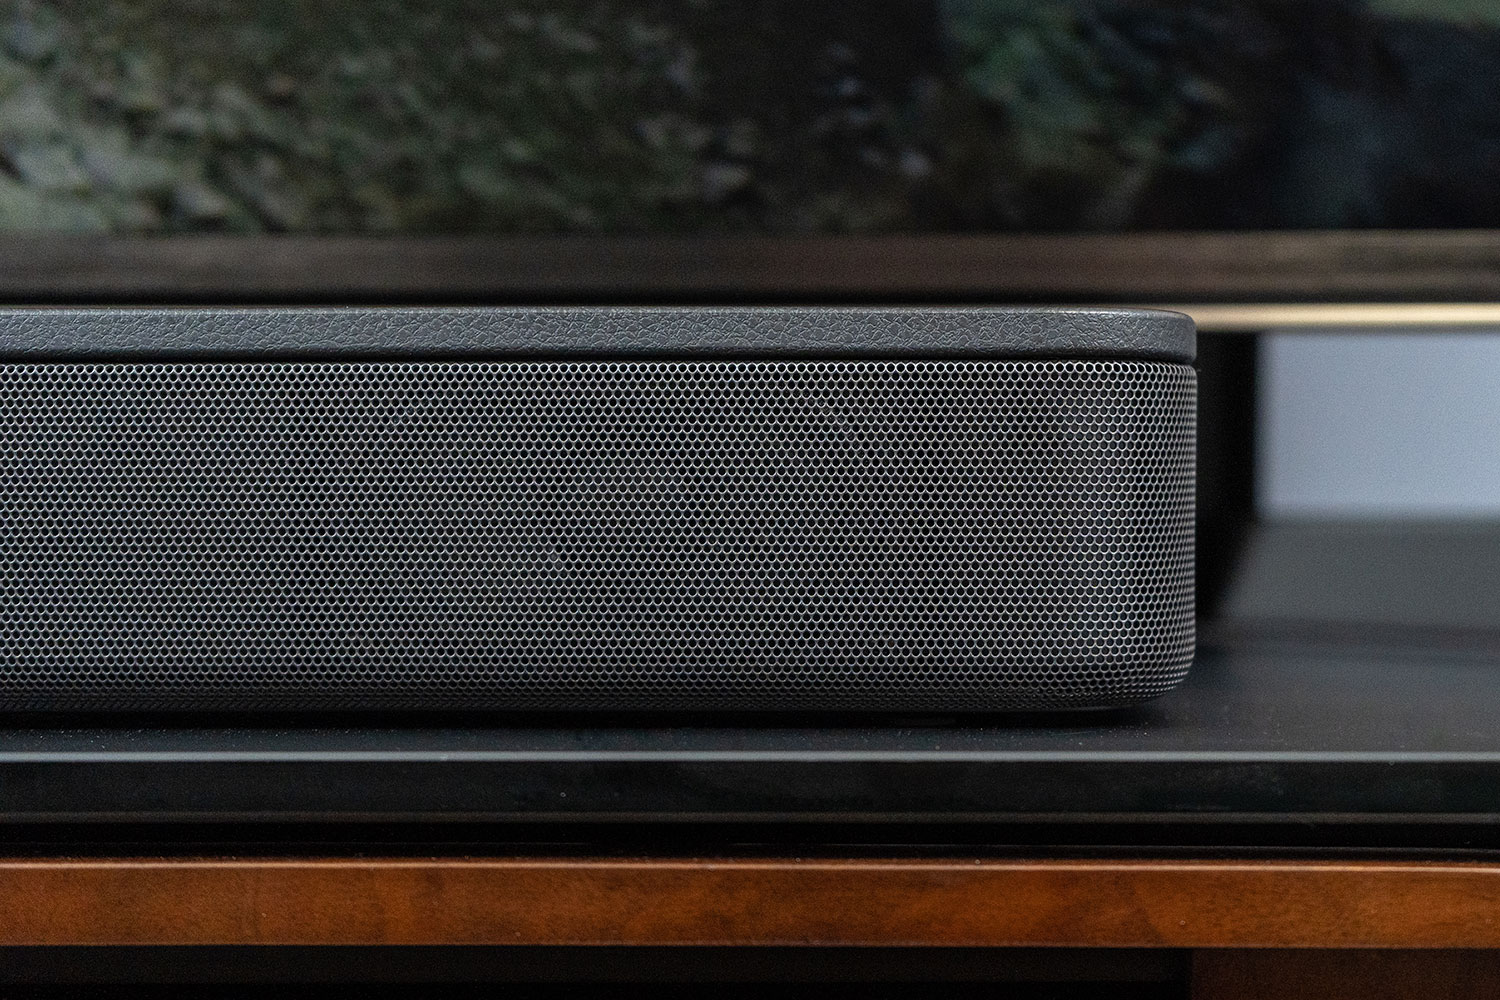 Sony HT-S350 Soundbar review: Mighty, Mighty Sound Comes At A Cost